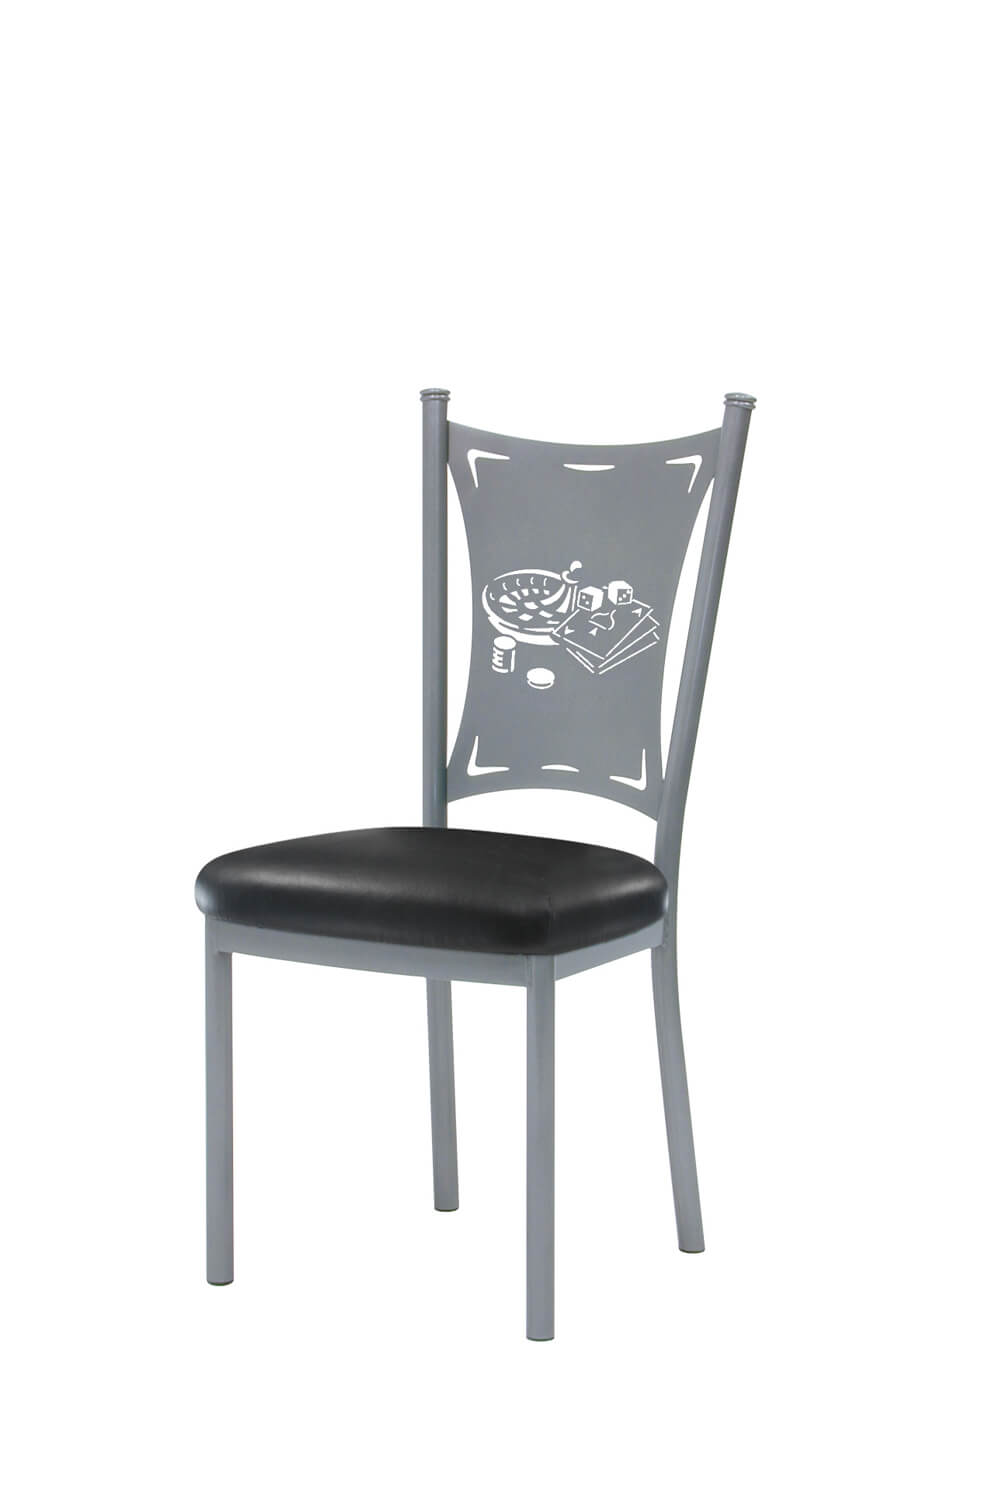 Buy Trica S Creation Dining Chair W Theme Back Nautical Cats